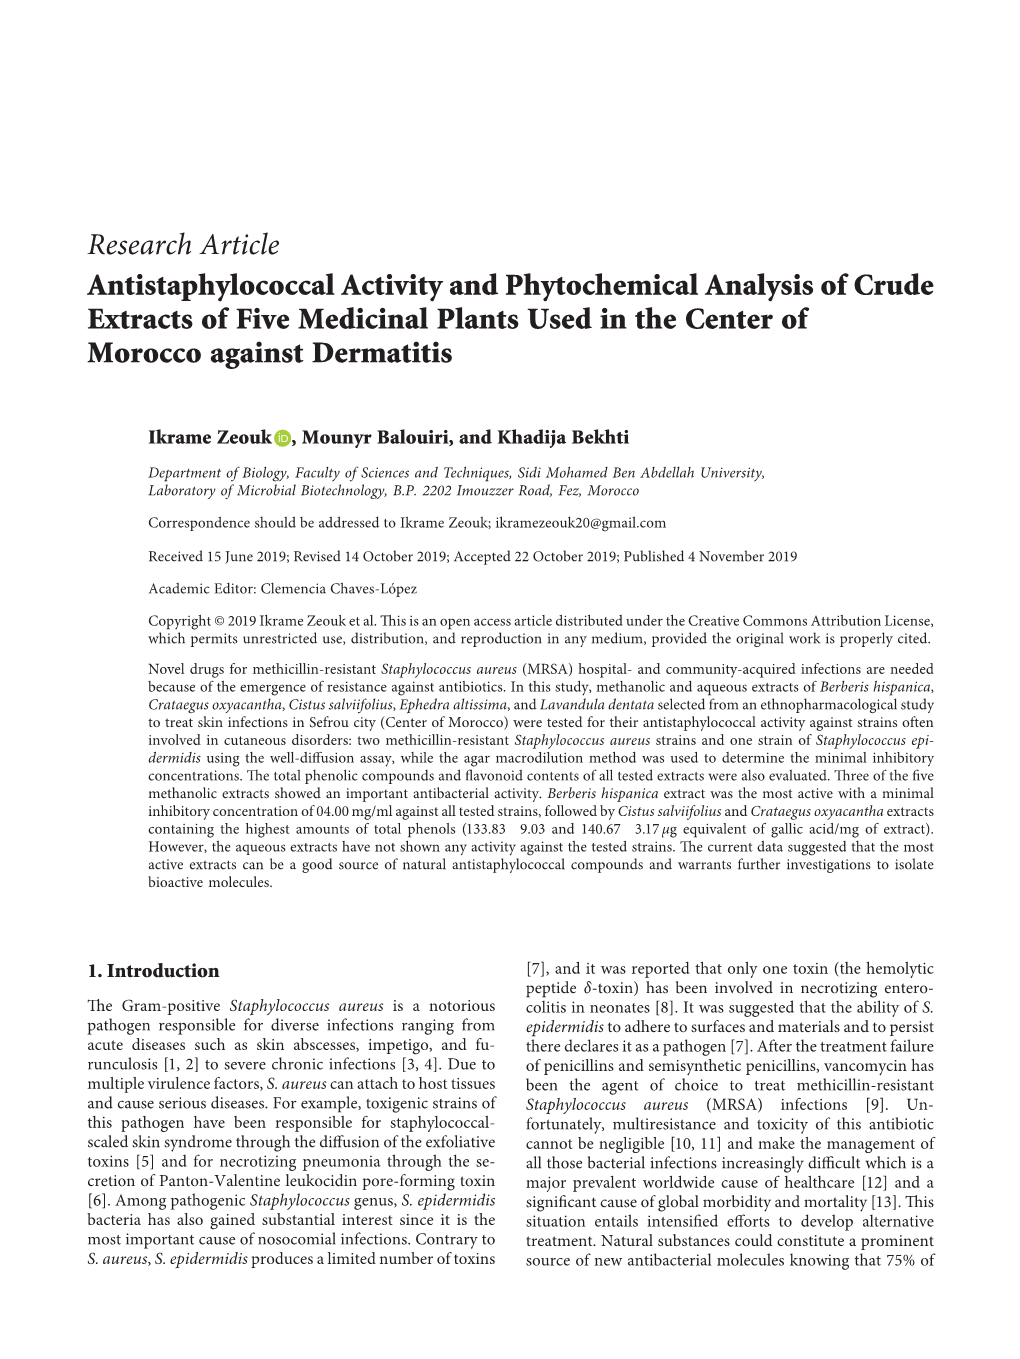 Research Article Antistaphylococcal Activity and Phytochemical Analysis of Crude Extracts of Five Medicinal Plants Used in the Center of Morocco Against Dermatitis